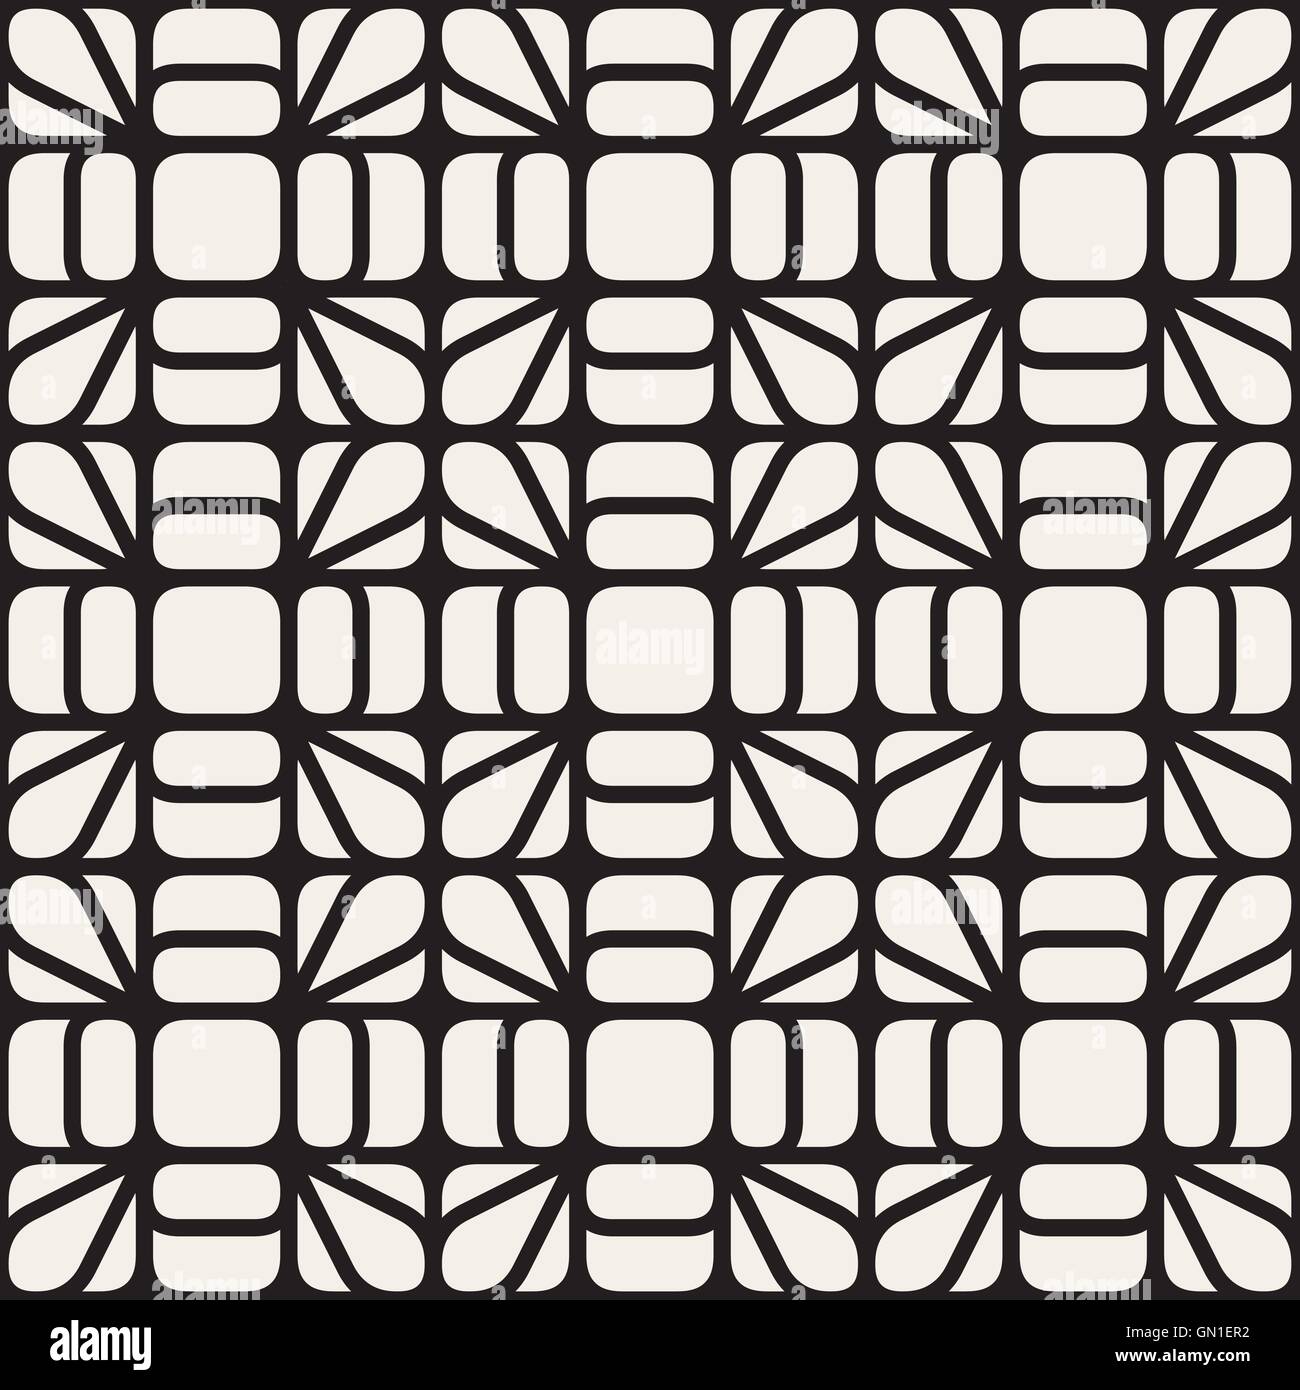 Vector Seamless Black and White Rounded Line Geometric Lace